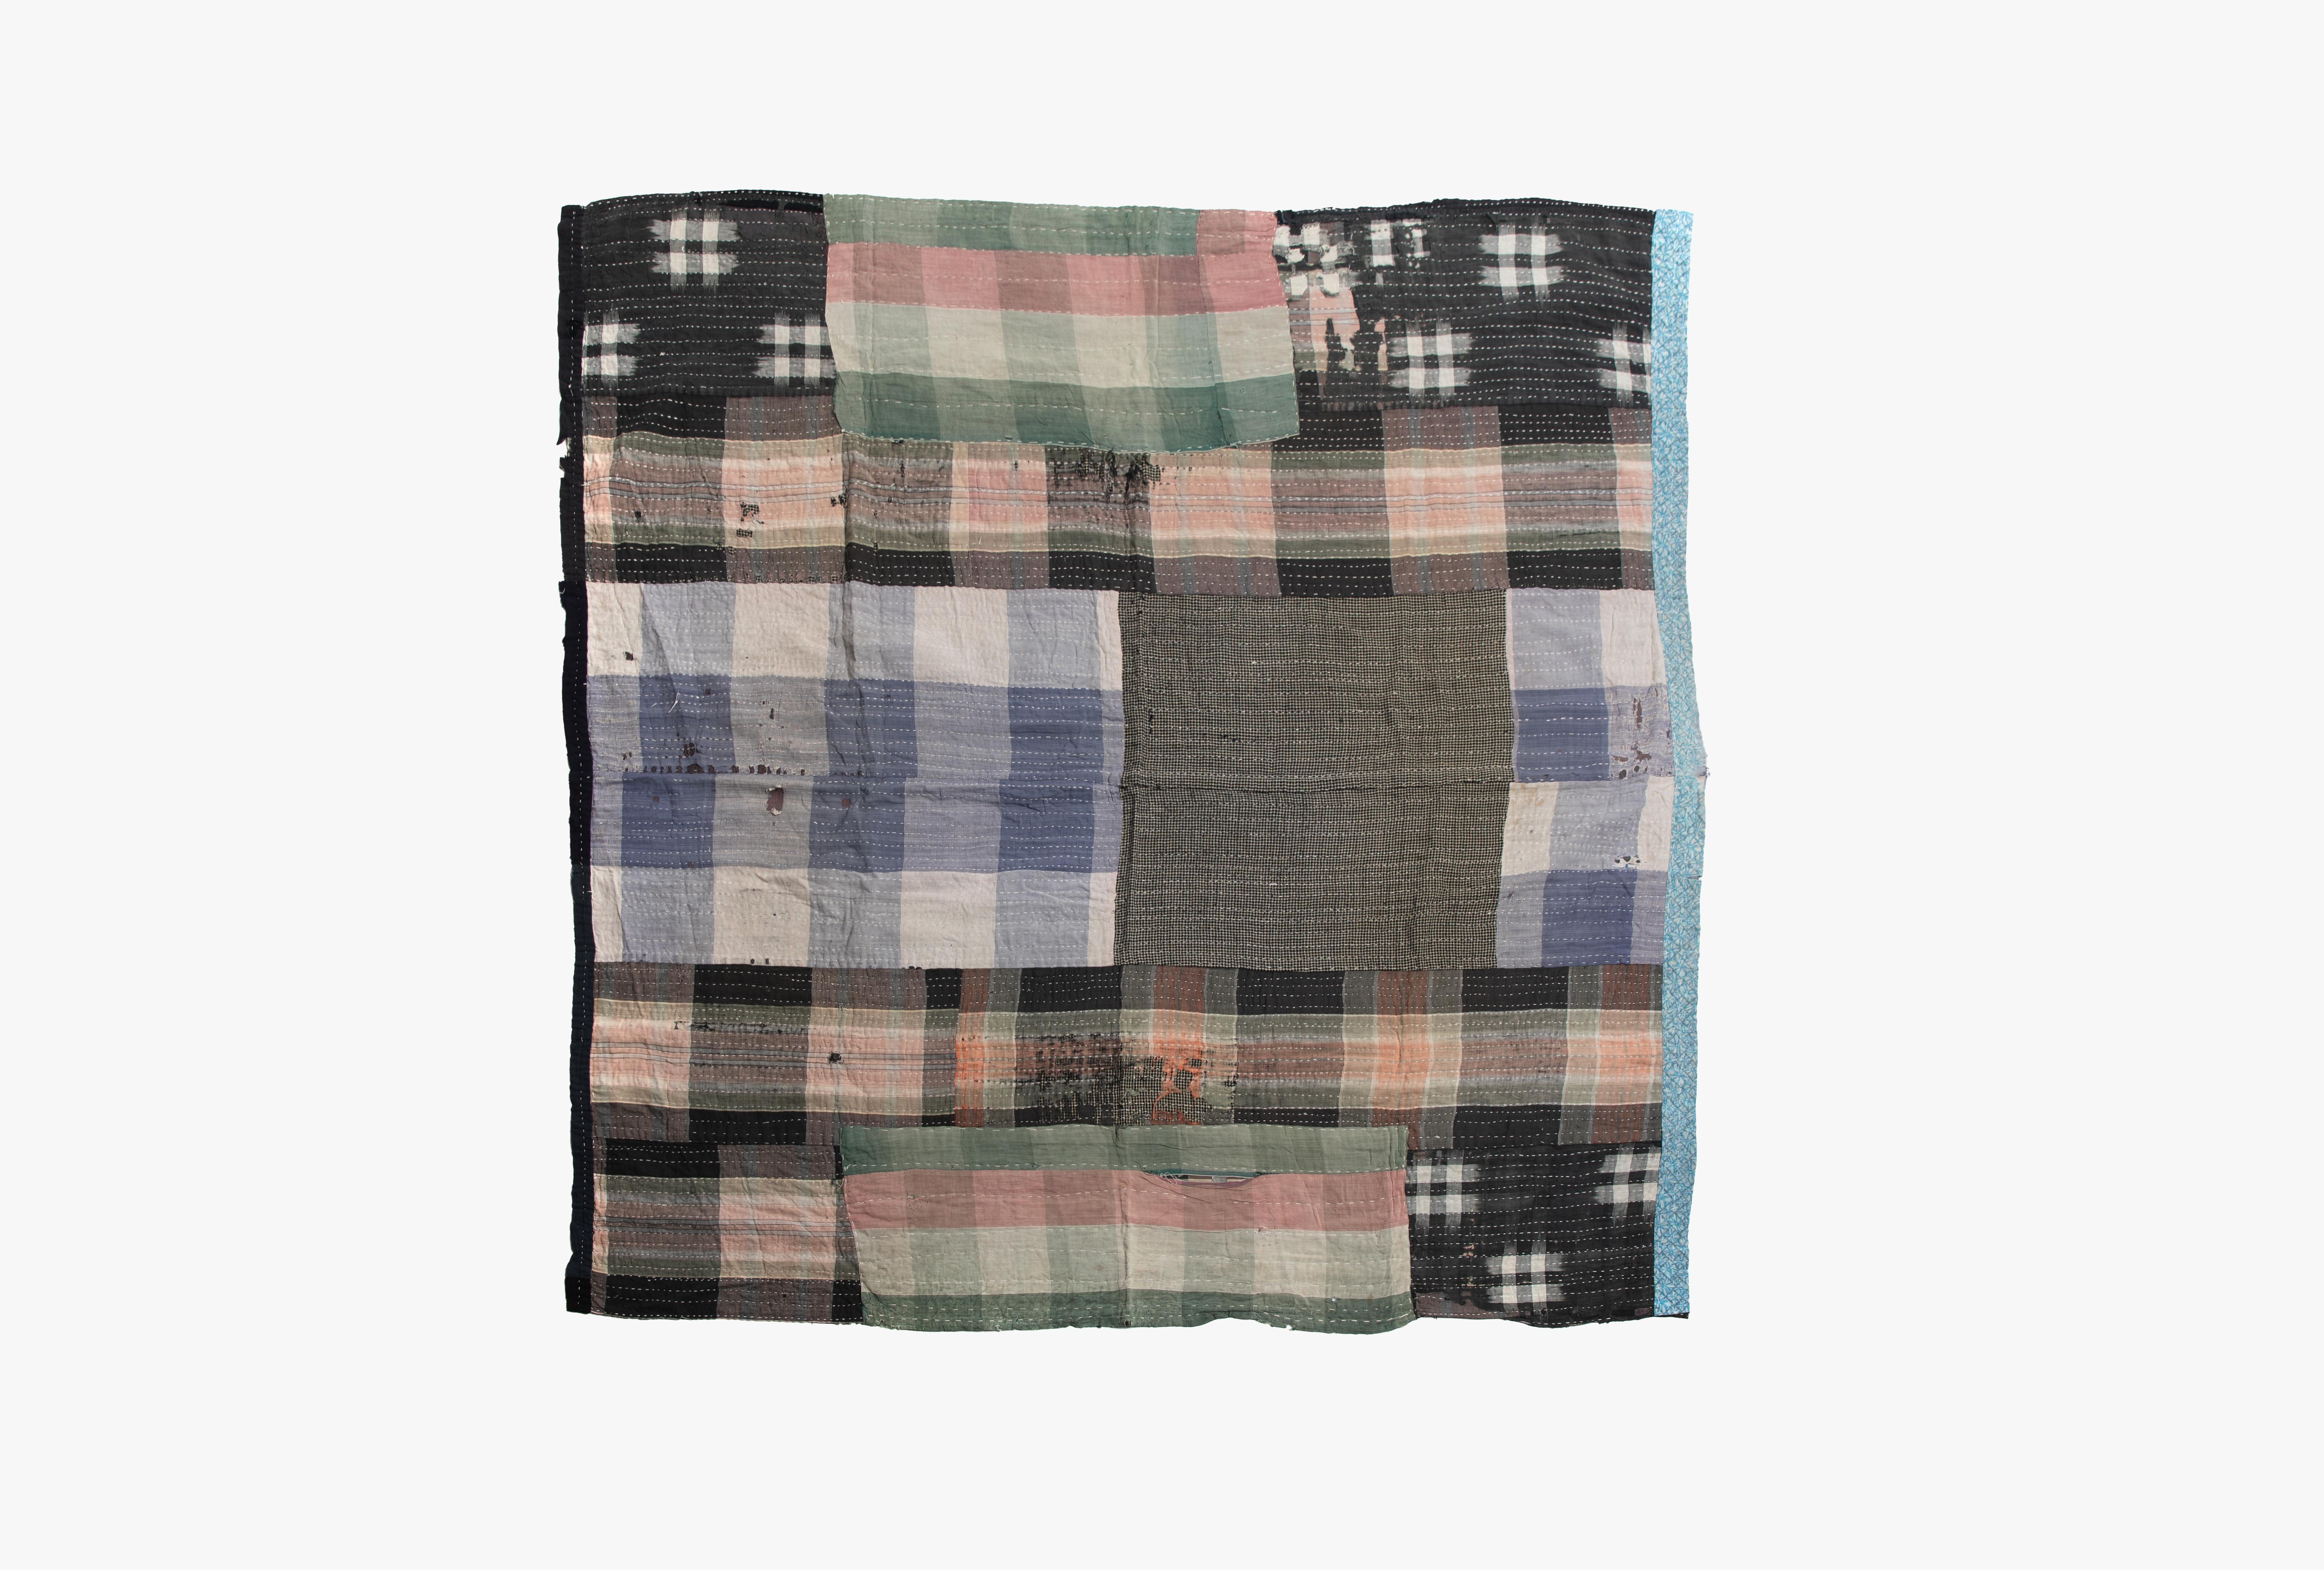 This blanket has an incredible patchwork quality and size. It feels both very intentionally created while also taking advantage of whatever patterns/materials were available. It’s not precious - it has age and wear. It was meant for living with and